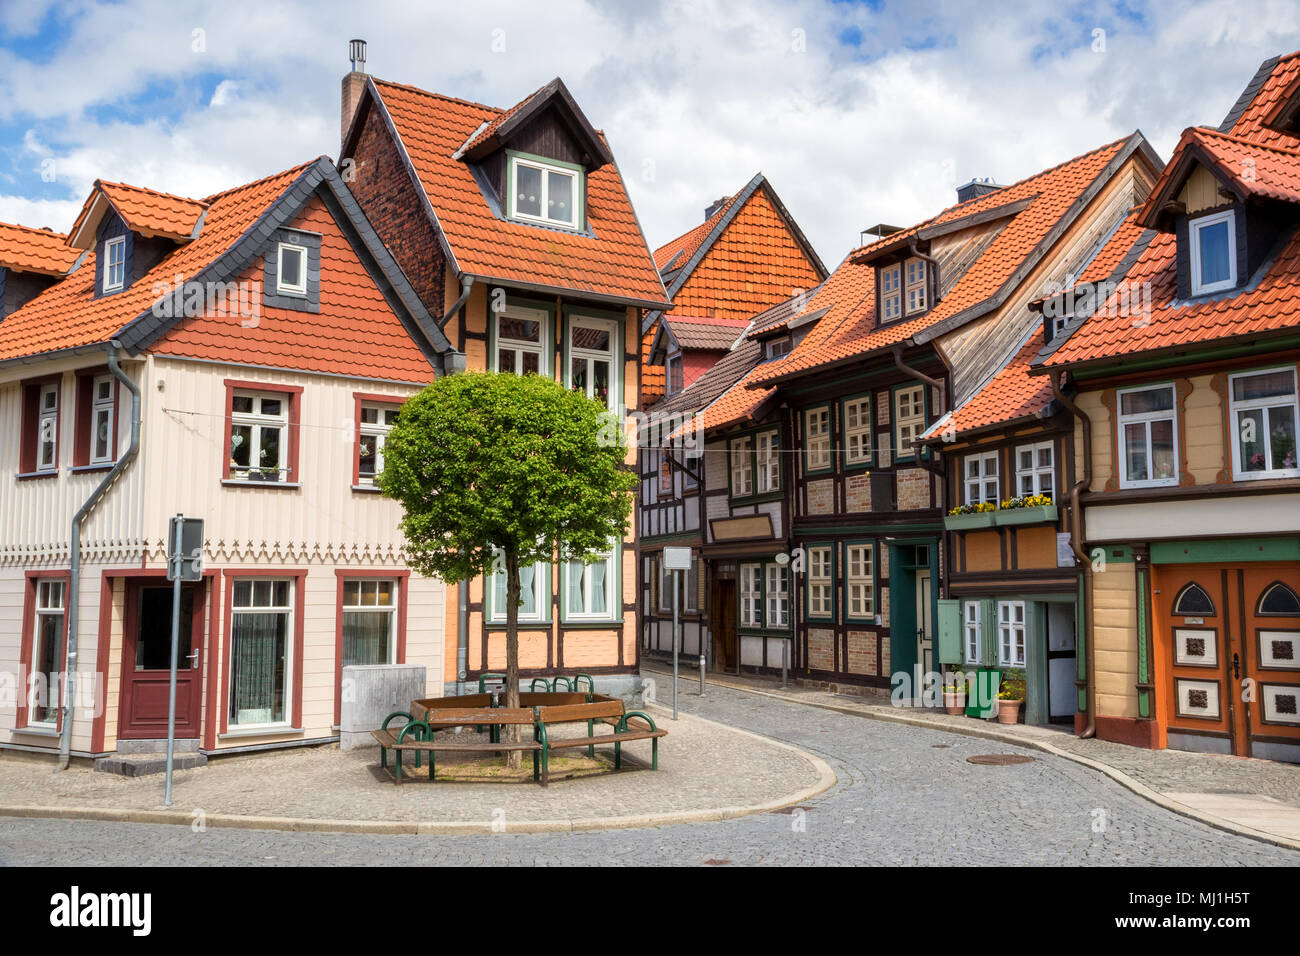 Historic timber framed houses in the centre of Wernigerode town in Saxony-Anhalt, Germany Stock Photo